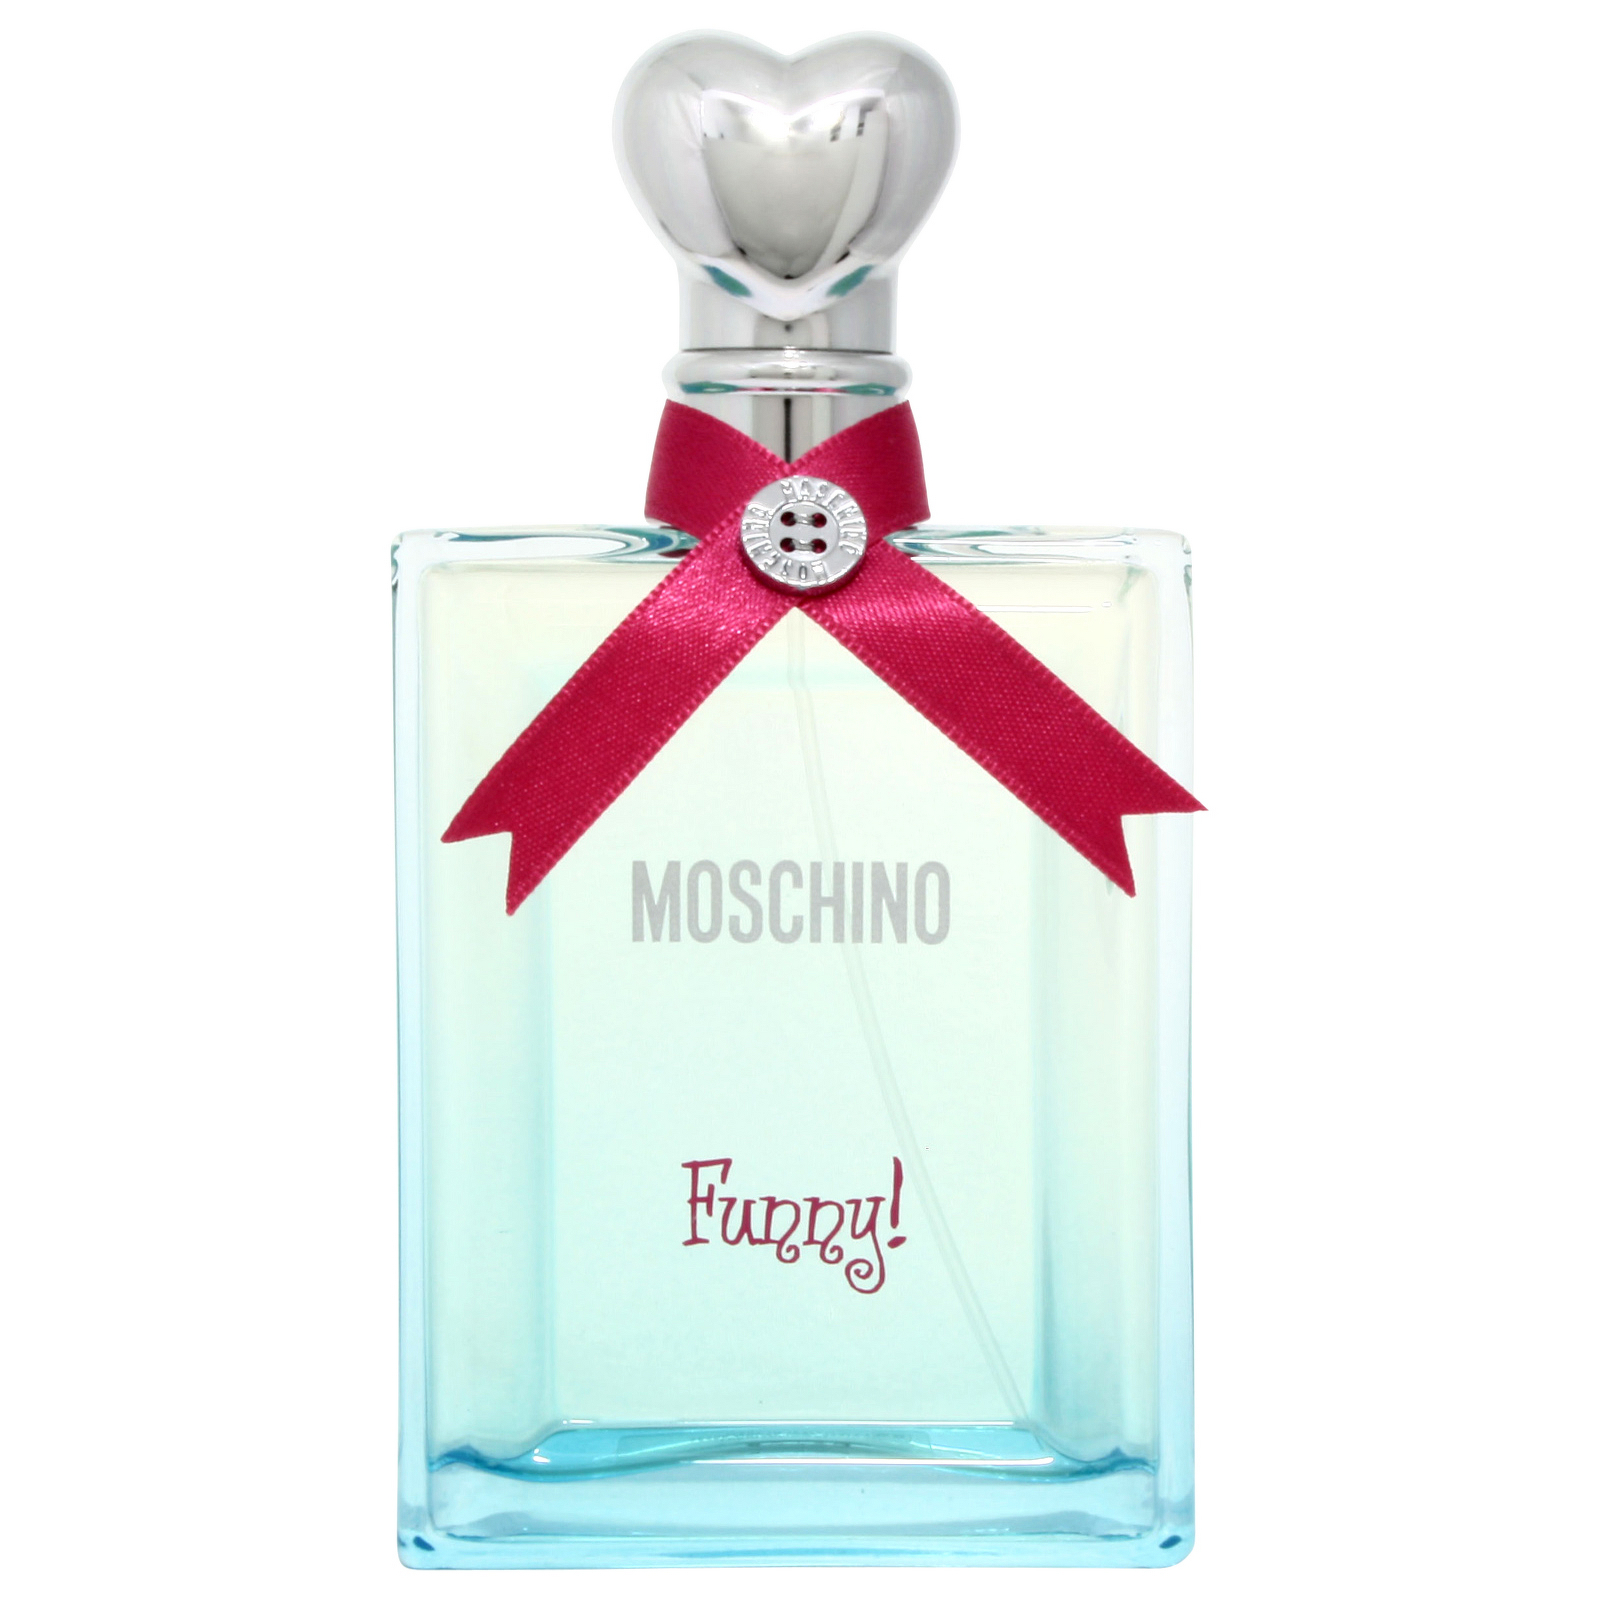 Moschino funny цена. Moschino funny for women EDT 100ml. Moschino funny! Lady Tester 100ml EDT. Moschino funny w EDT 100 ml. Moschino Parfum funny Eau de Toilette.